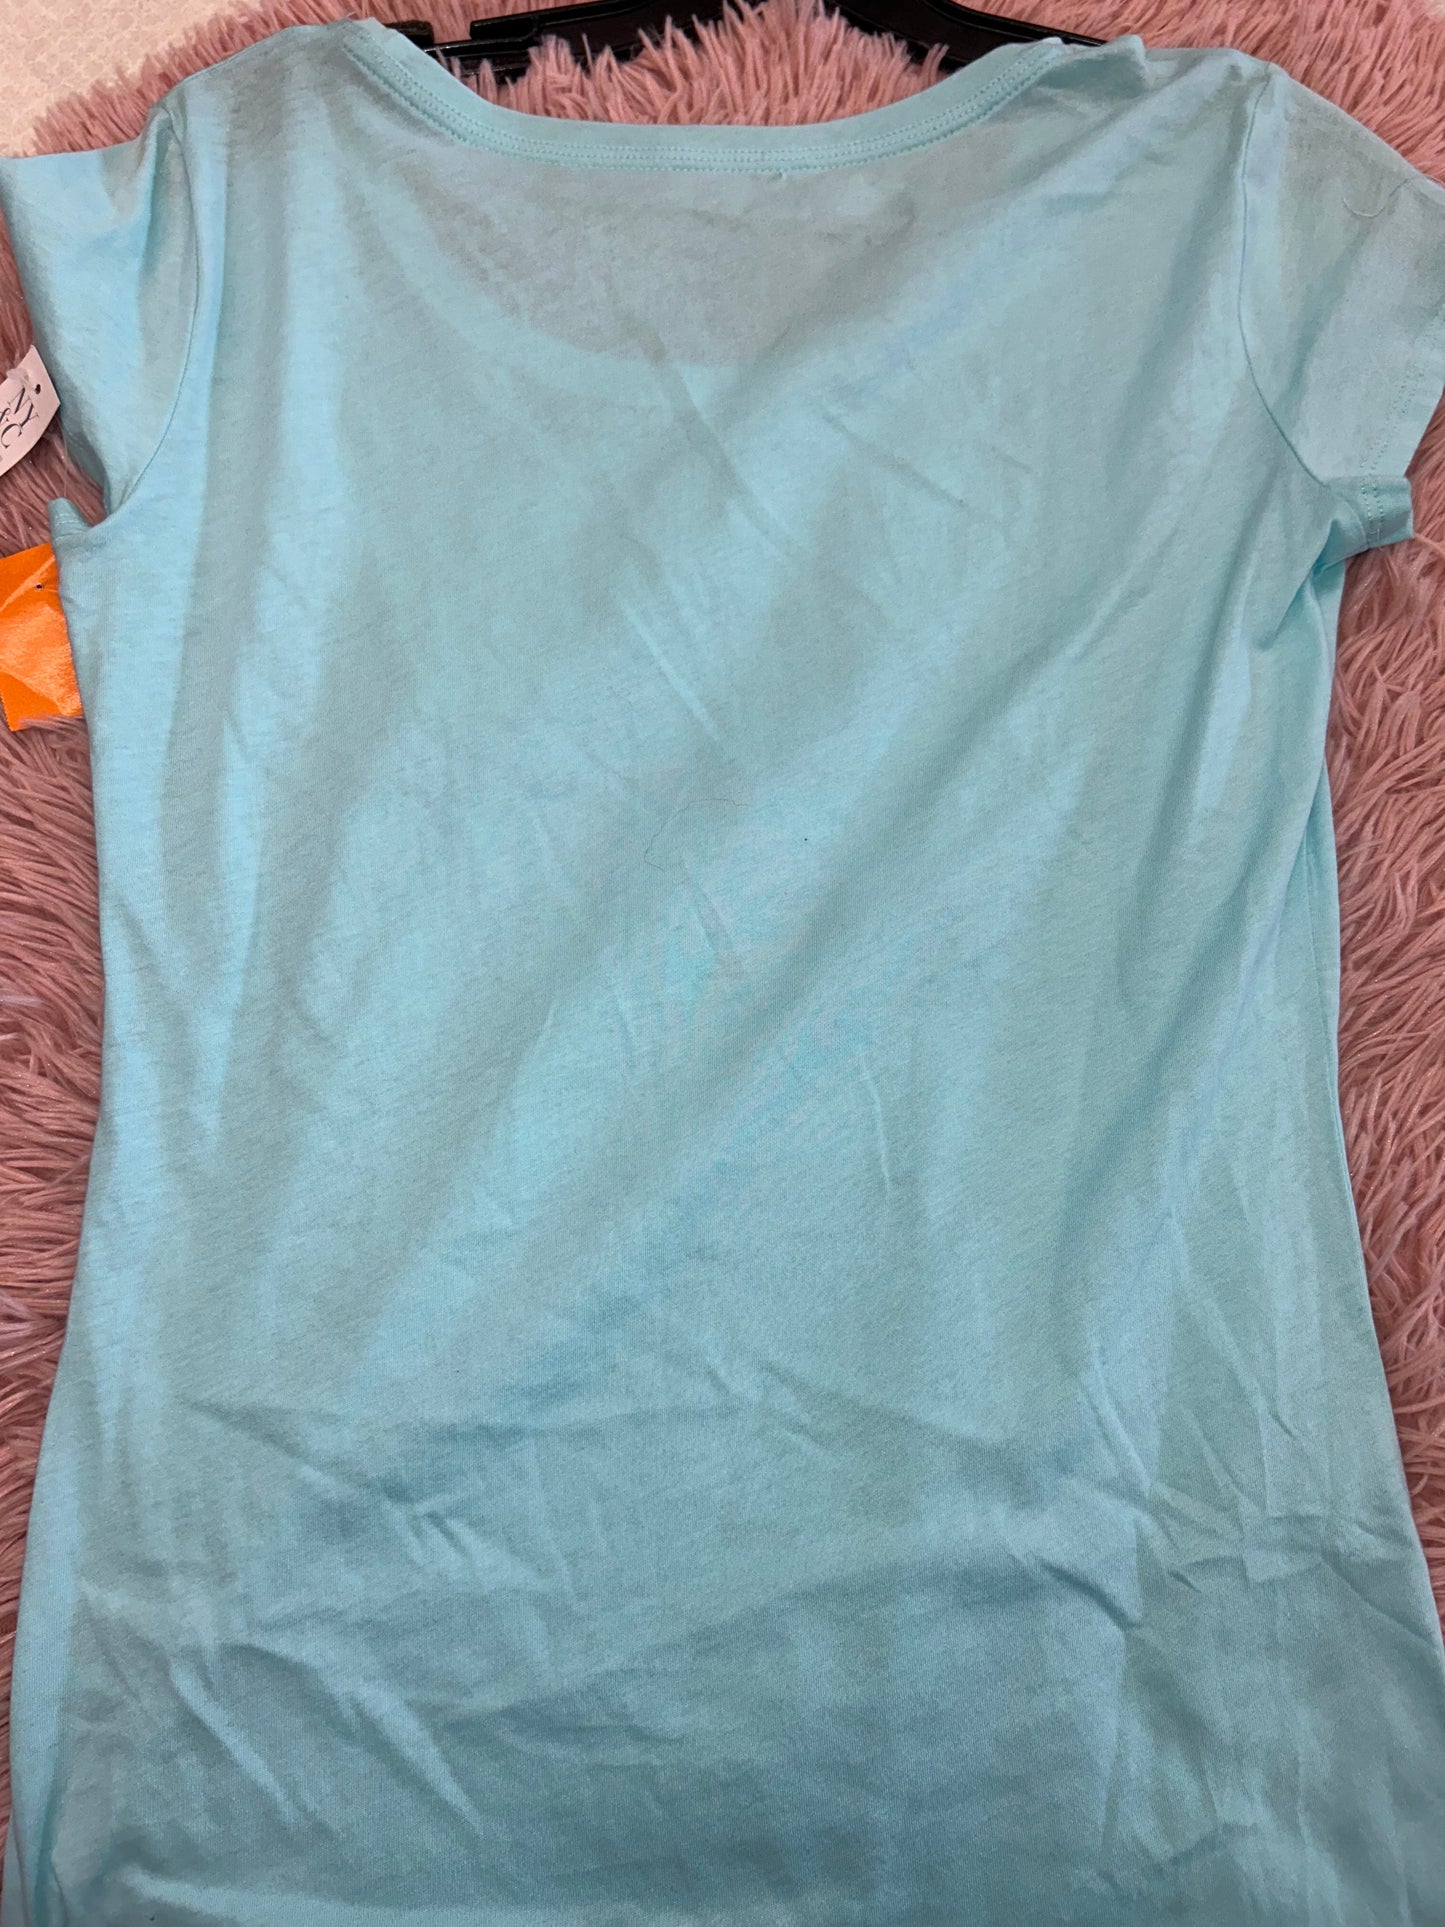 Blue Top Short Sleeve New York And Co, Size Xs